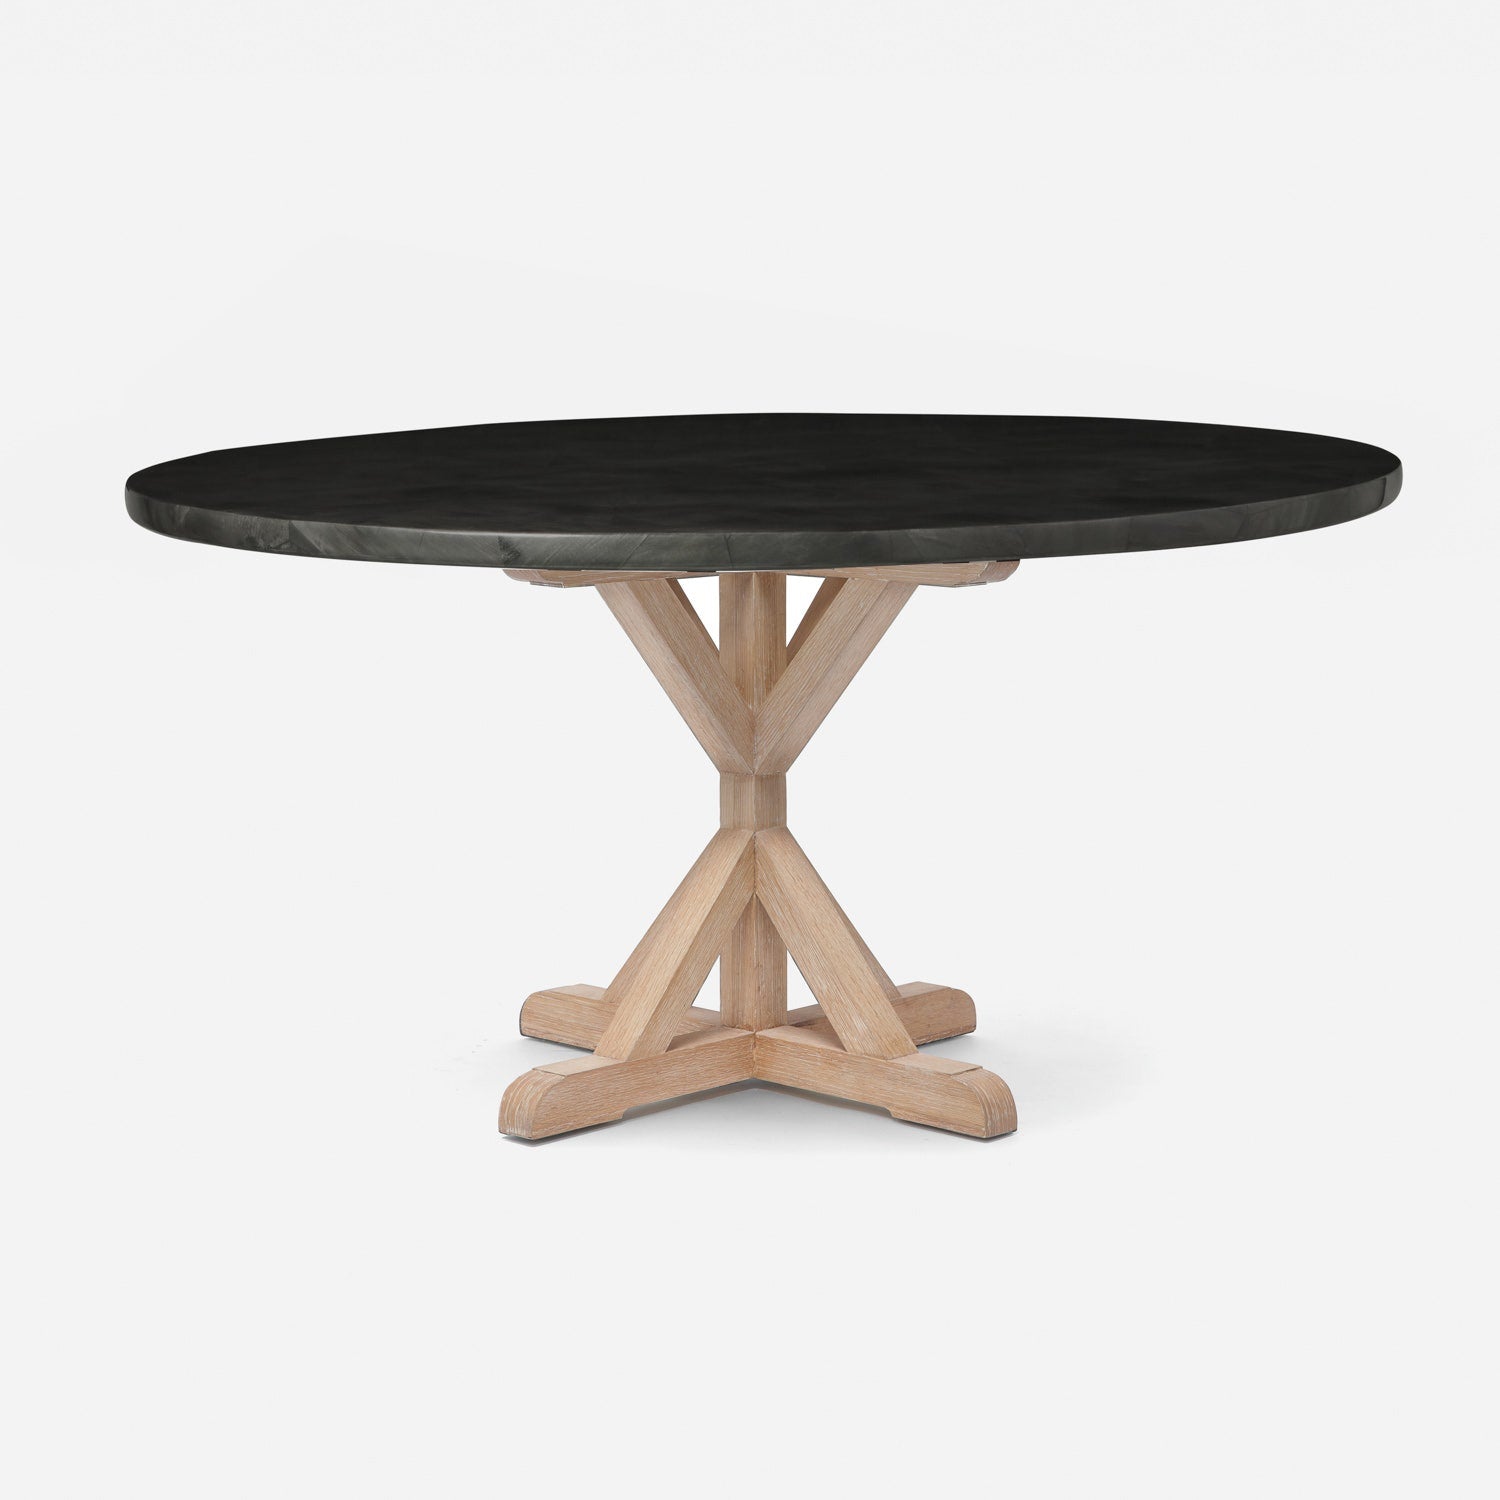 Made Goods Dane 60" x 30" White Cerused Oak Dinning Table With Round Black/White Stripe Marble Table Top